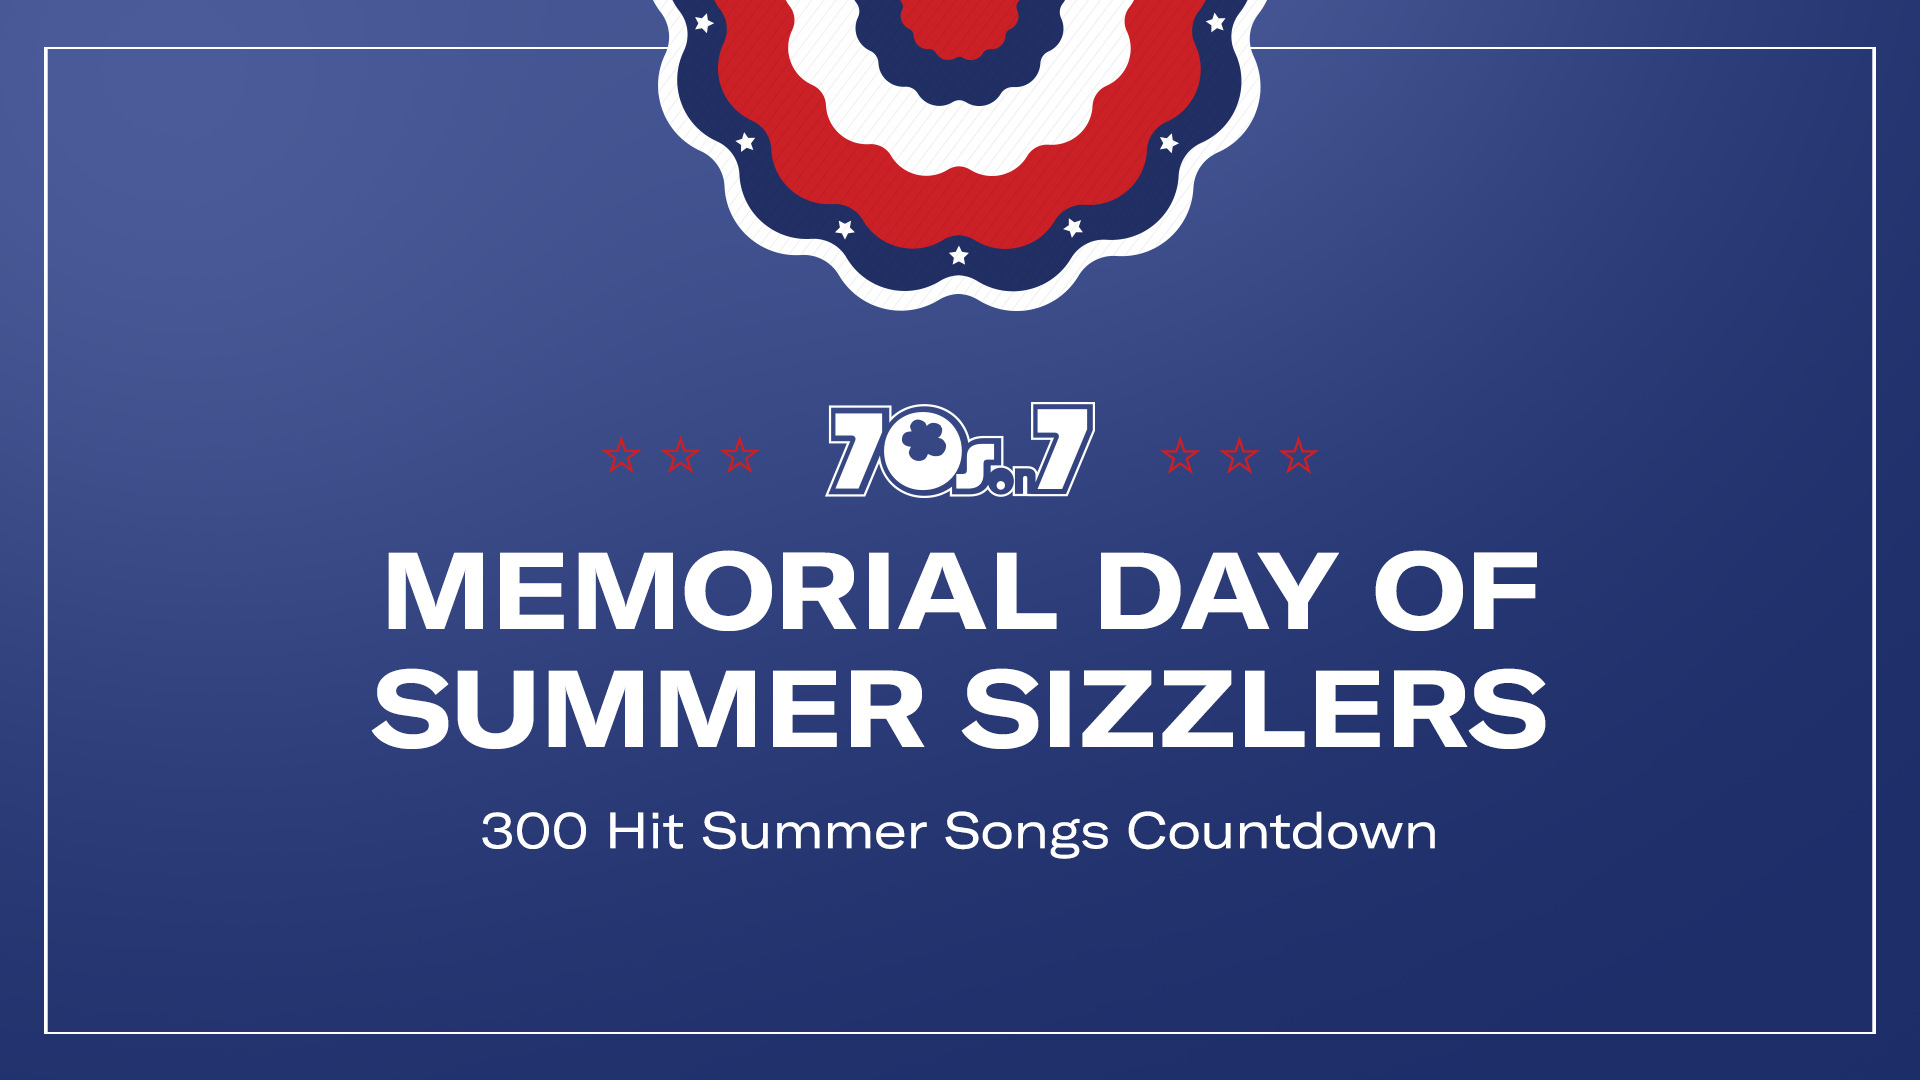 70s on 7 Memorial Day of Summer Sizzlers